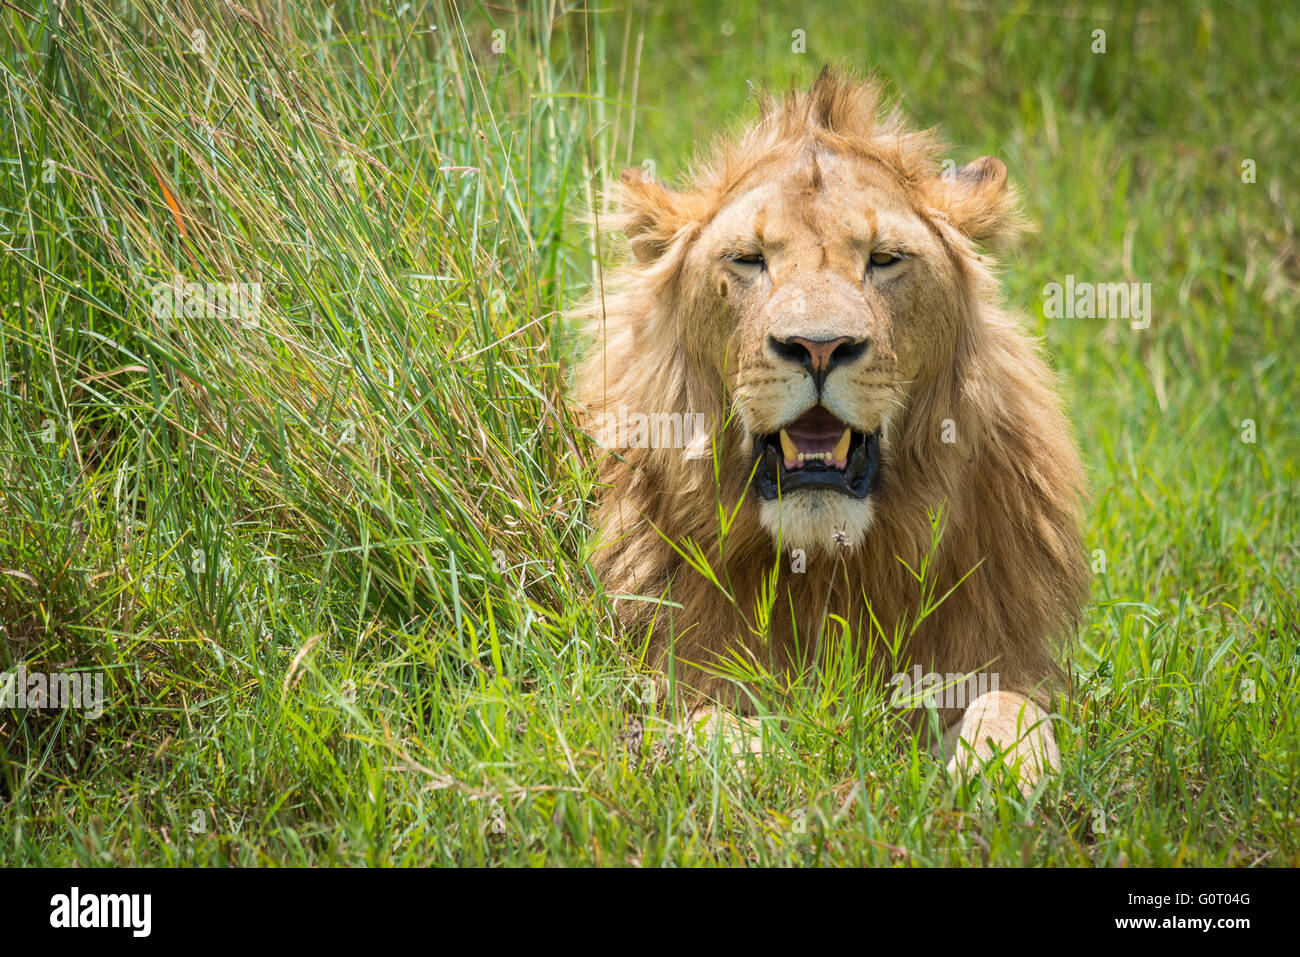 A young wild male lion in the fertile grasses of the Ngorongoro Crater conservation area in Tanzania, East Africa Stock Photo